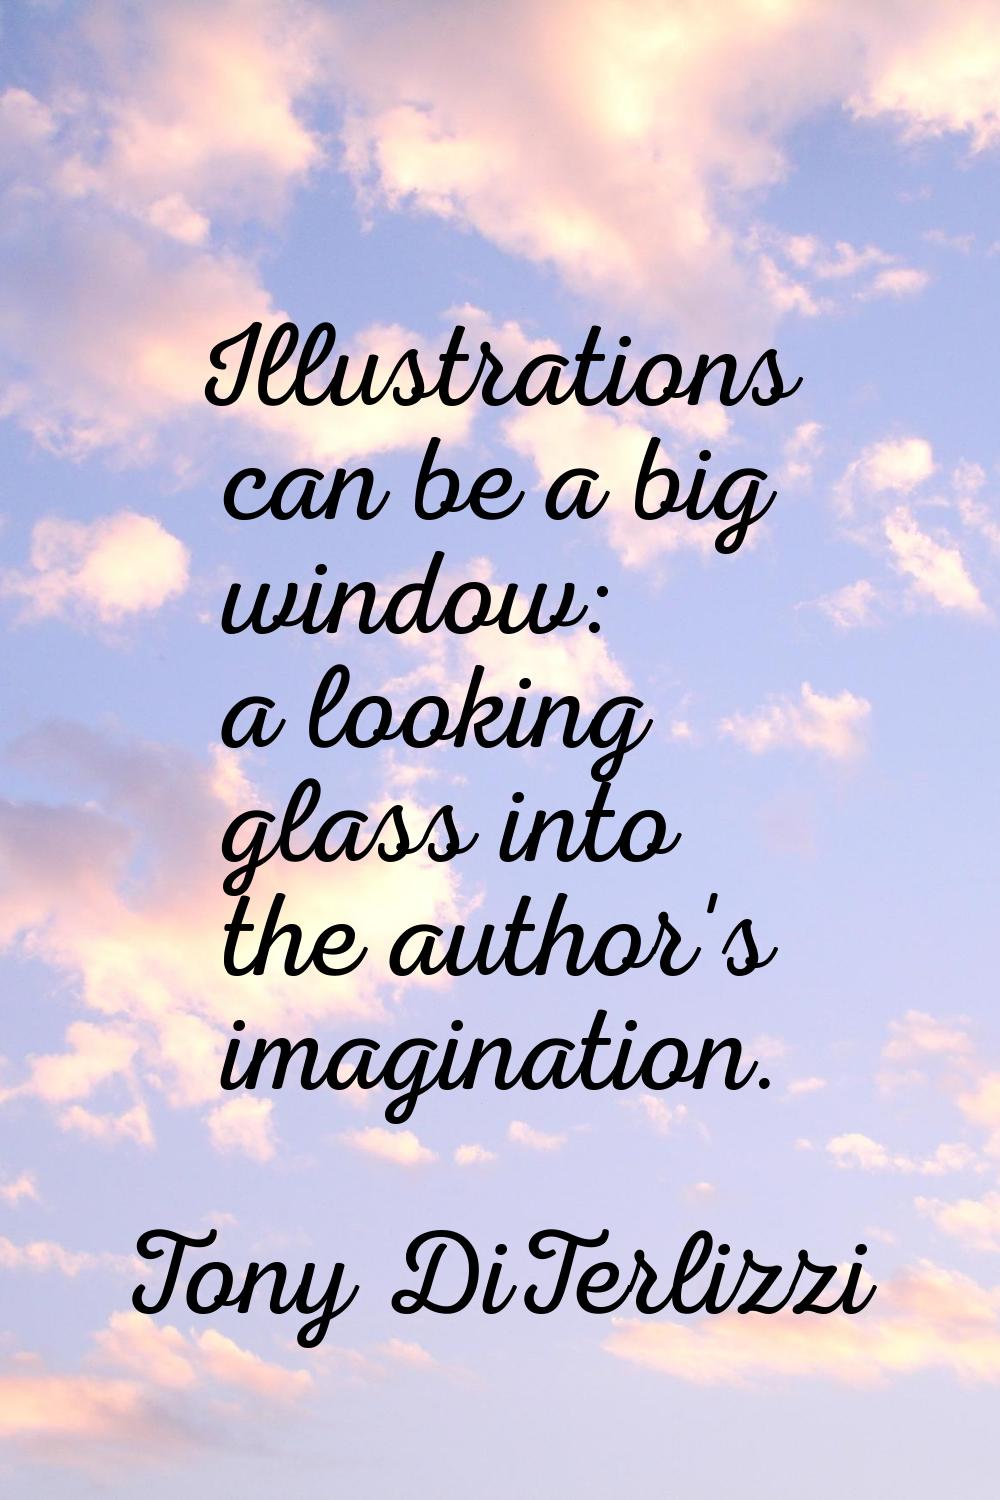 Illustrations can be a big window: a looking glass into the author's imagination.